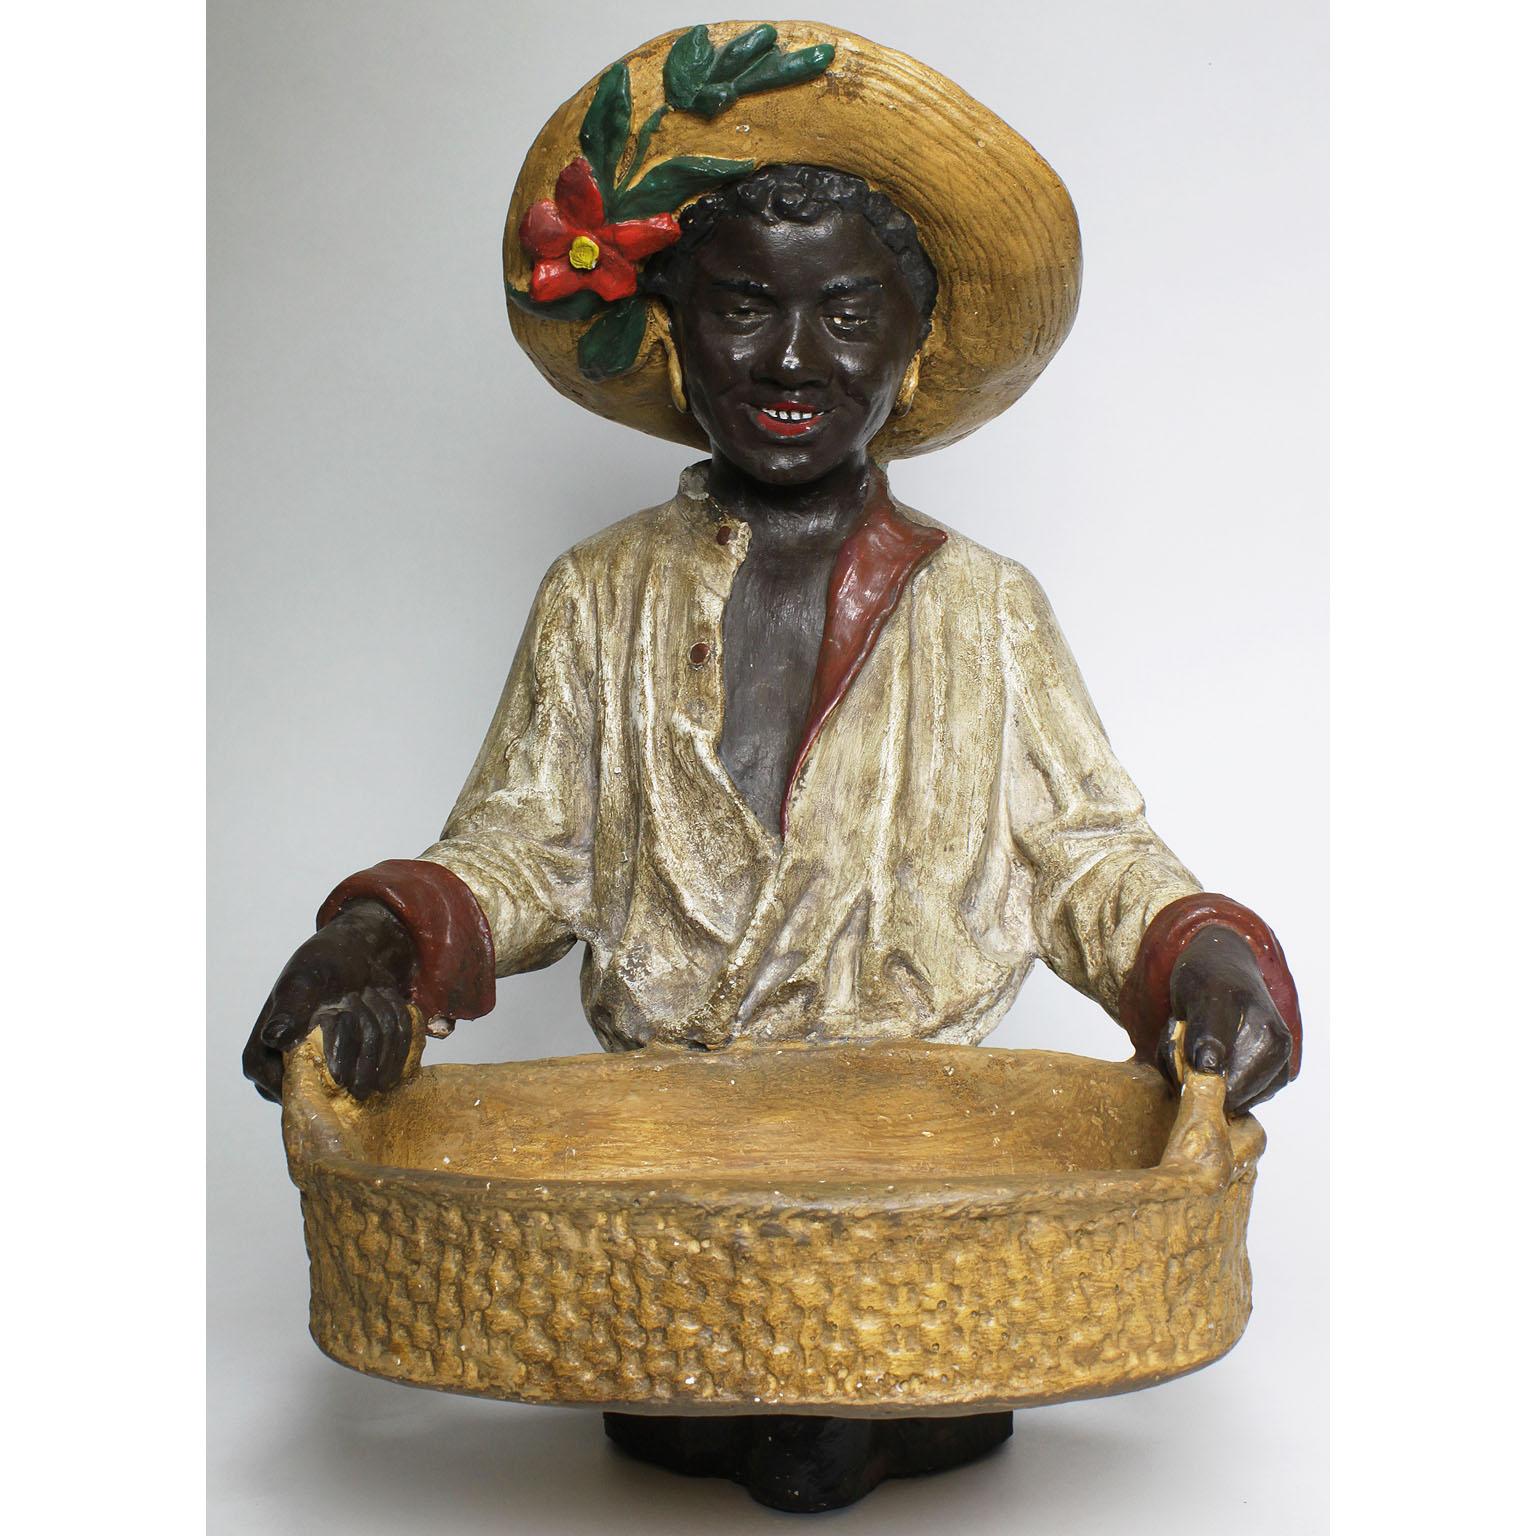 An Austrian early 20th century cast bust figure of an African girl holding a tray. The smiling young girl wearing a straw hat decorated with a flower and leaves, holding weaved-wicker-like tray, probably by Goldscheider's Porzellan-Manufactur and